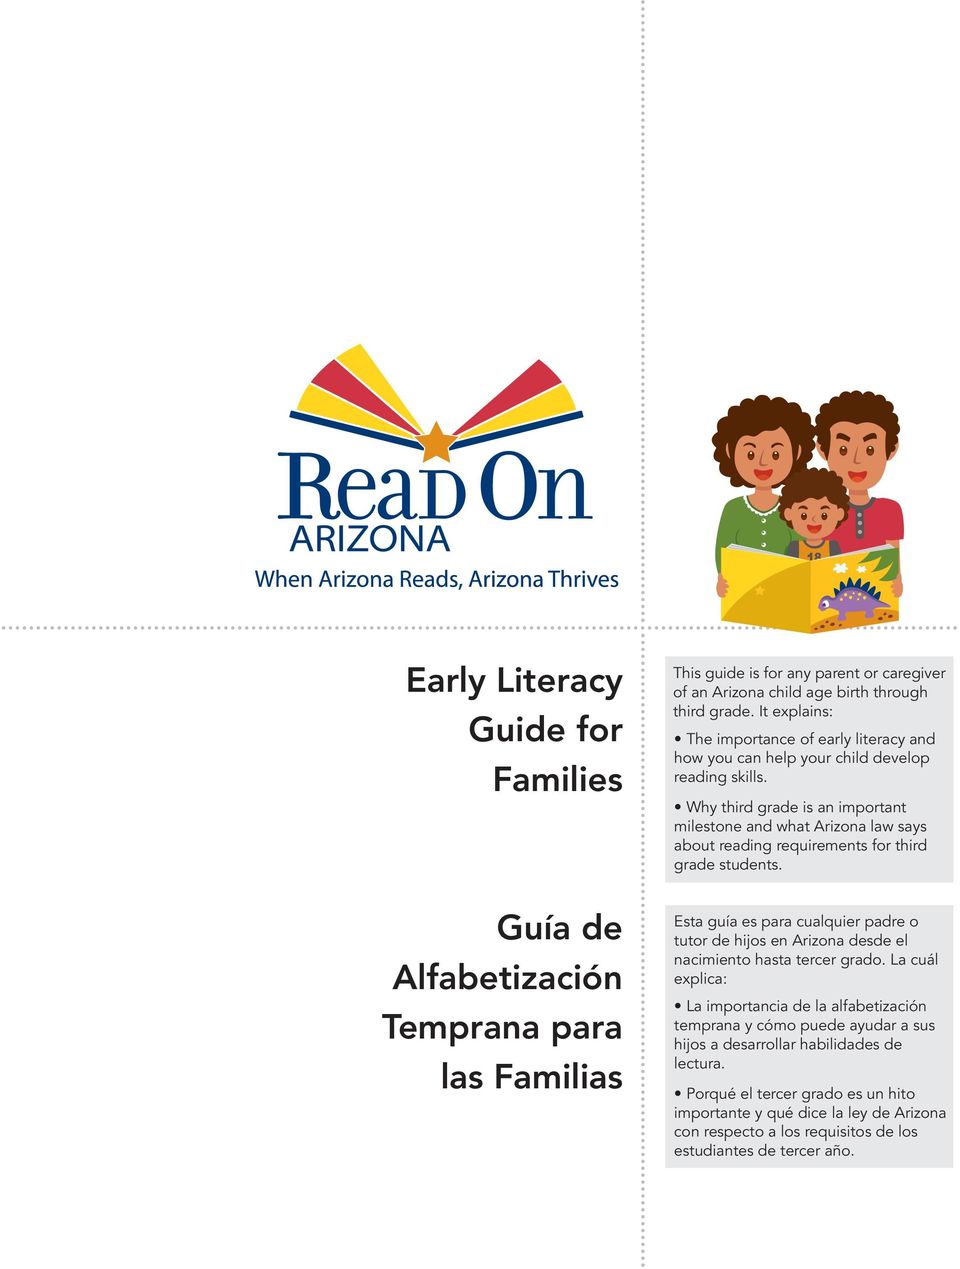 Why third grade is an important milestone and what Arizona law says about reading requirements for third grade students.